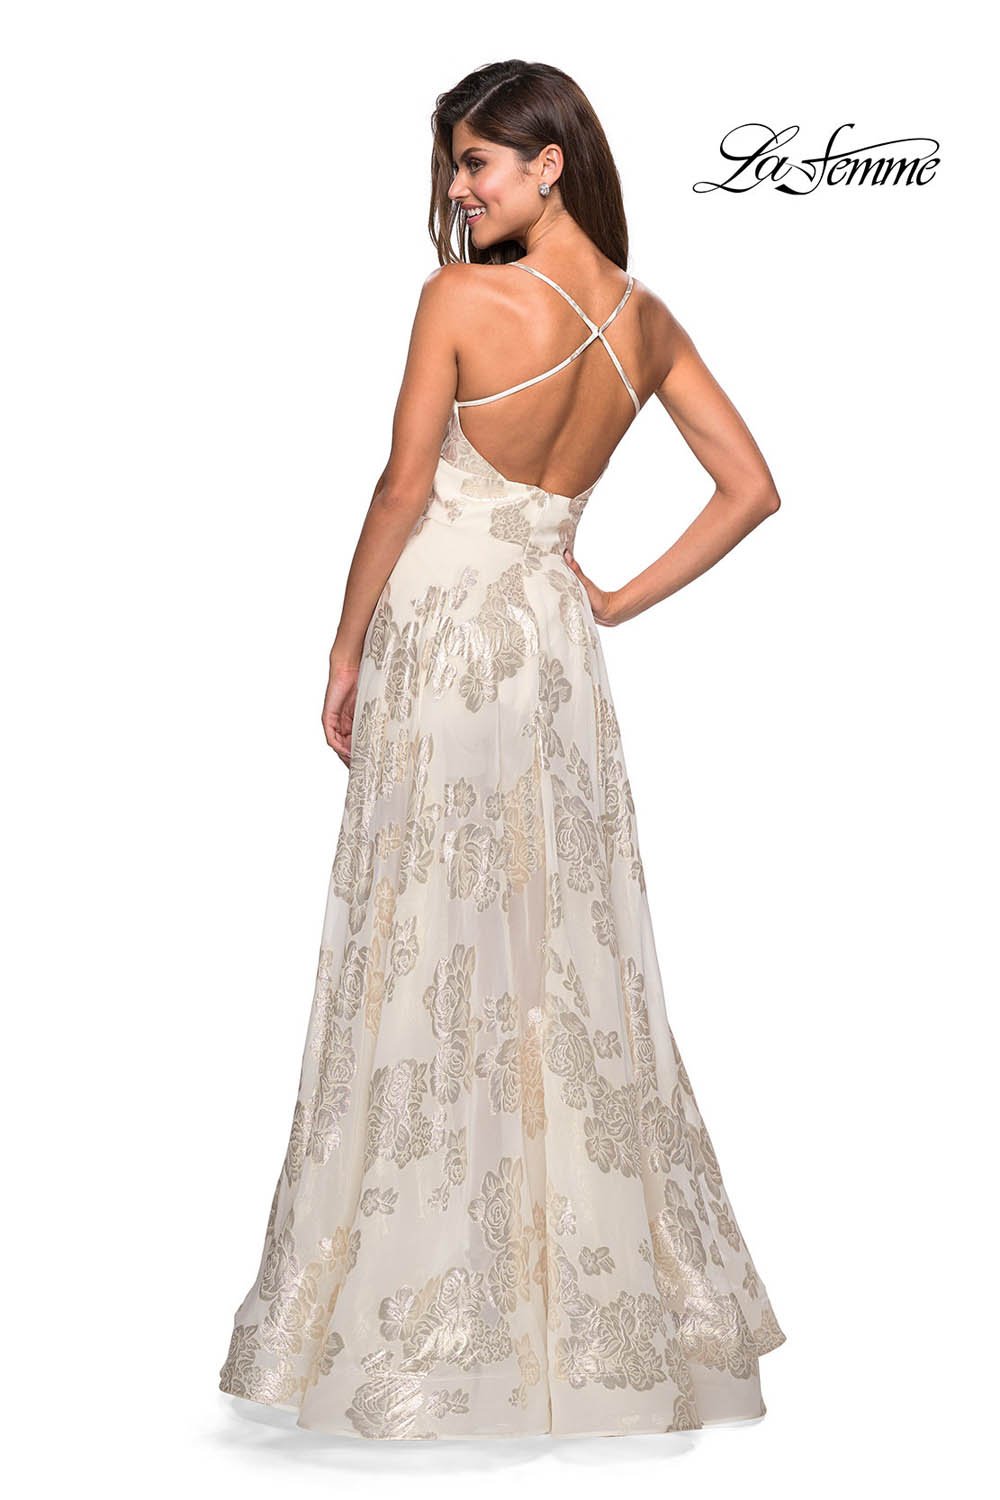 La Femme 27547 dress images in these colors: Ivory Gold.